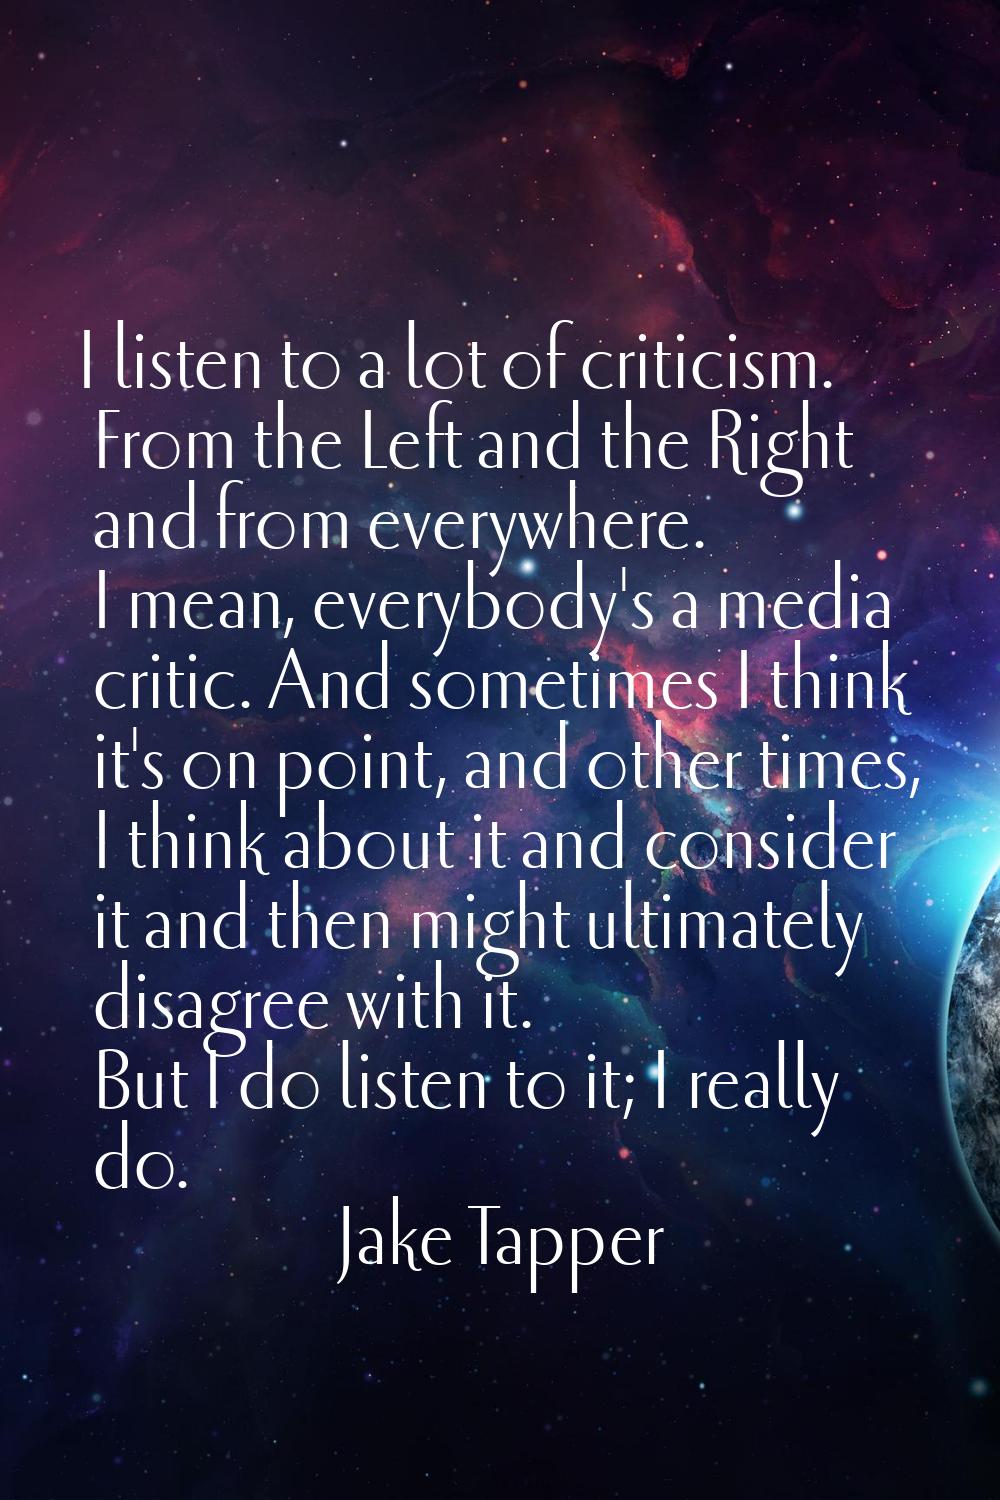 I listen to a lot of criticism. From the Left and the Right and from everywhere. I mean, everybody'